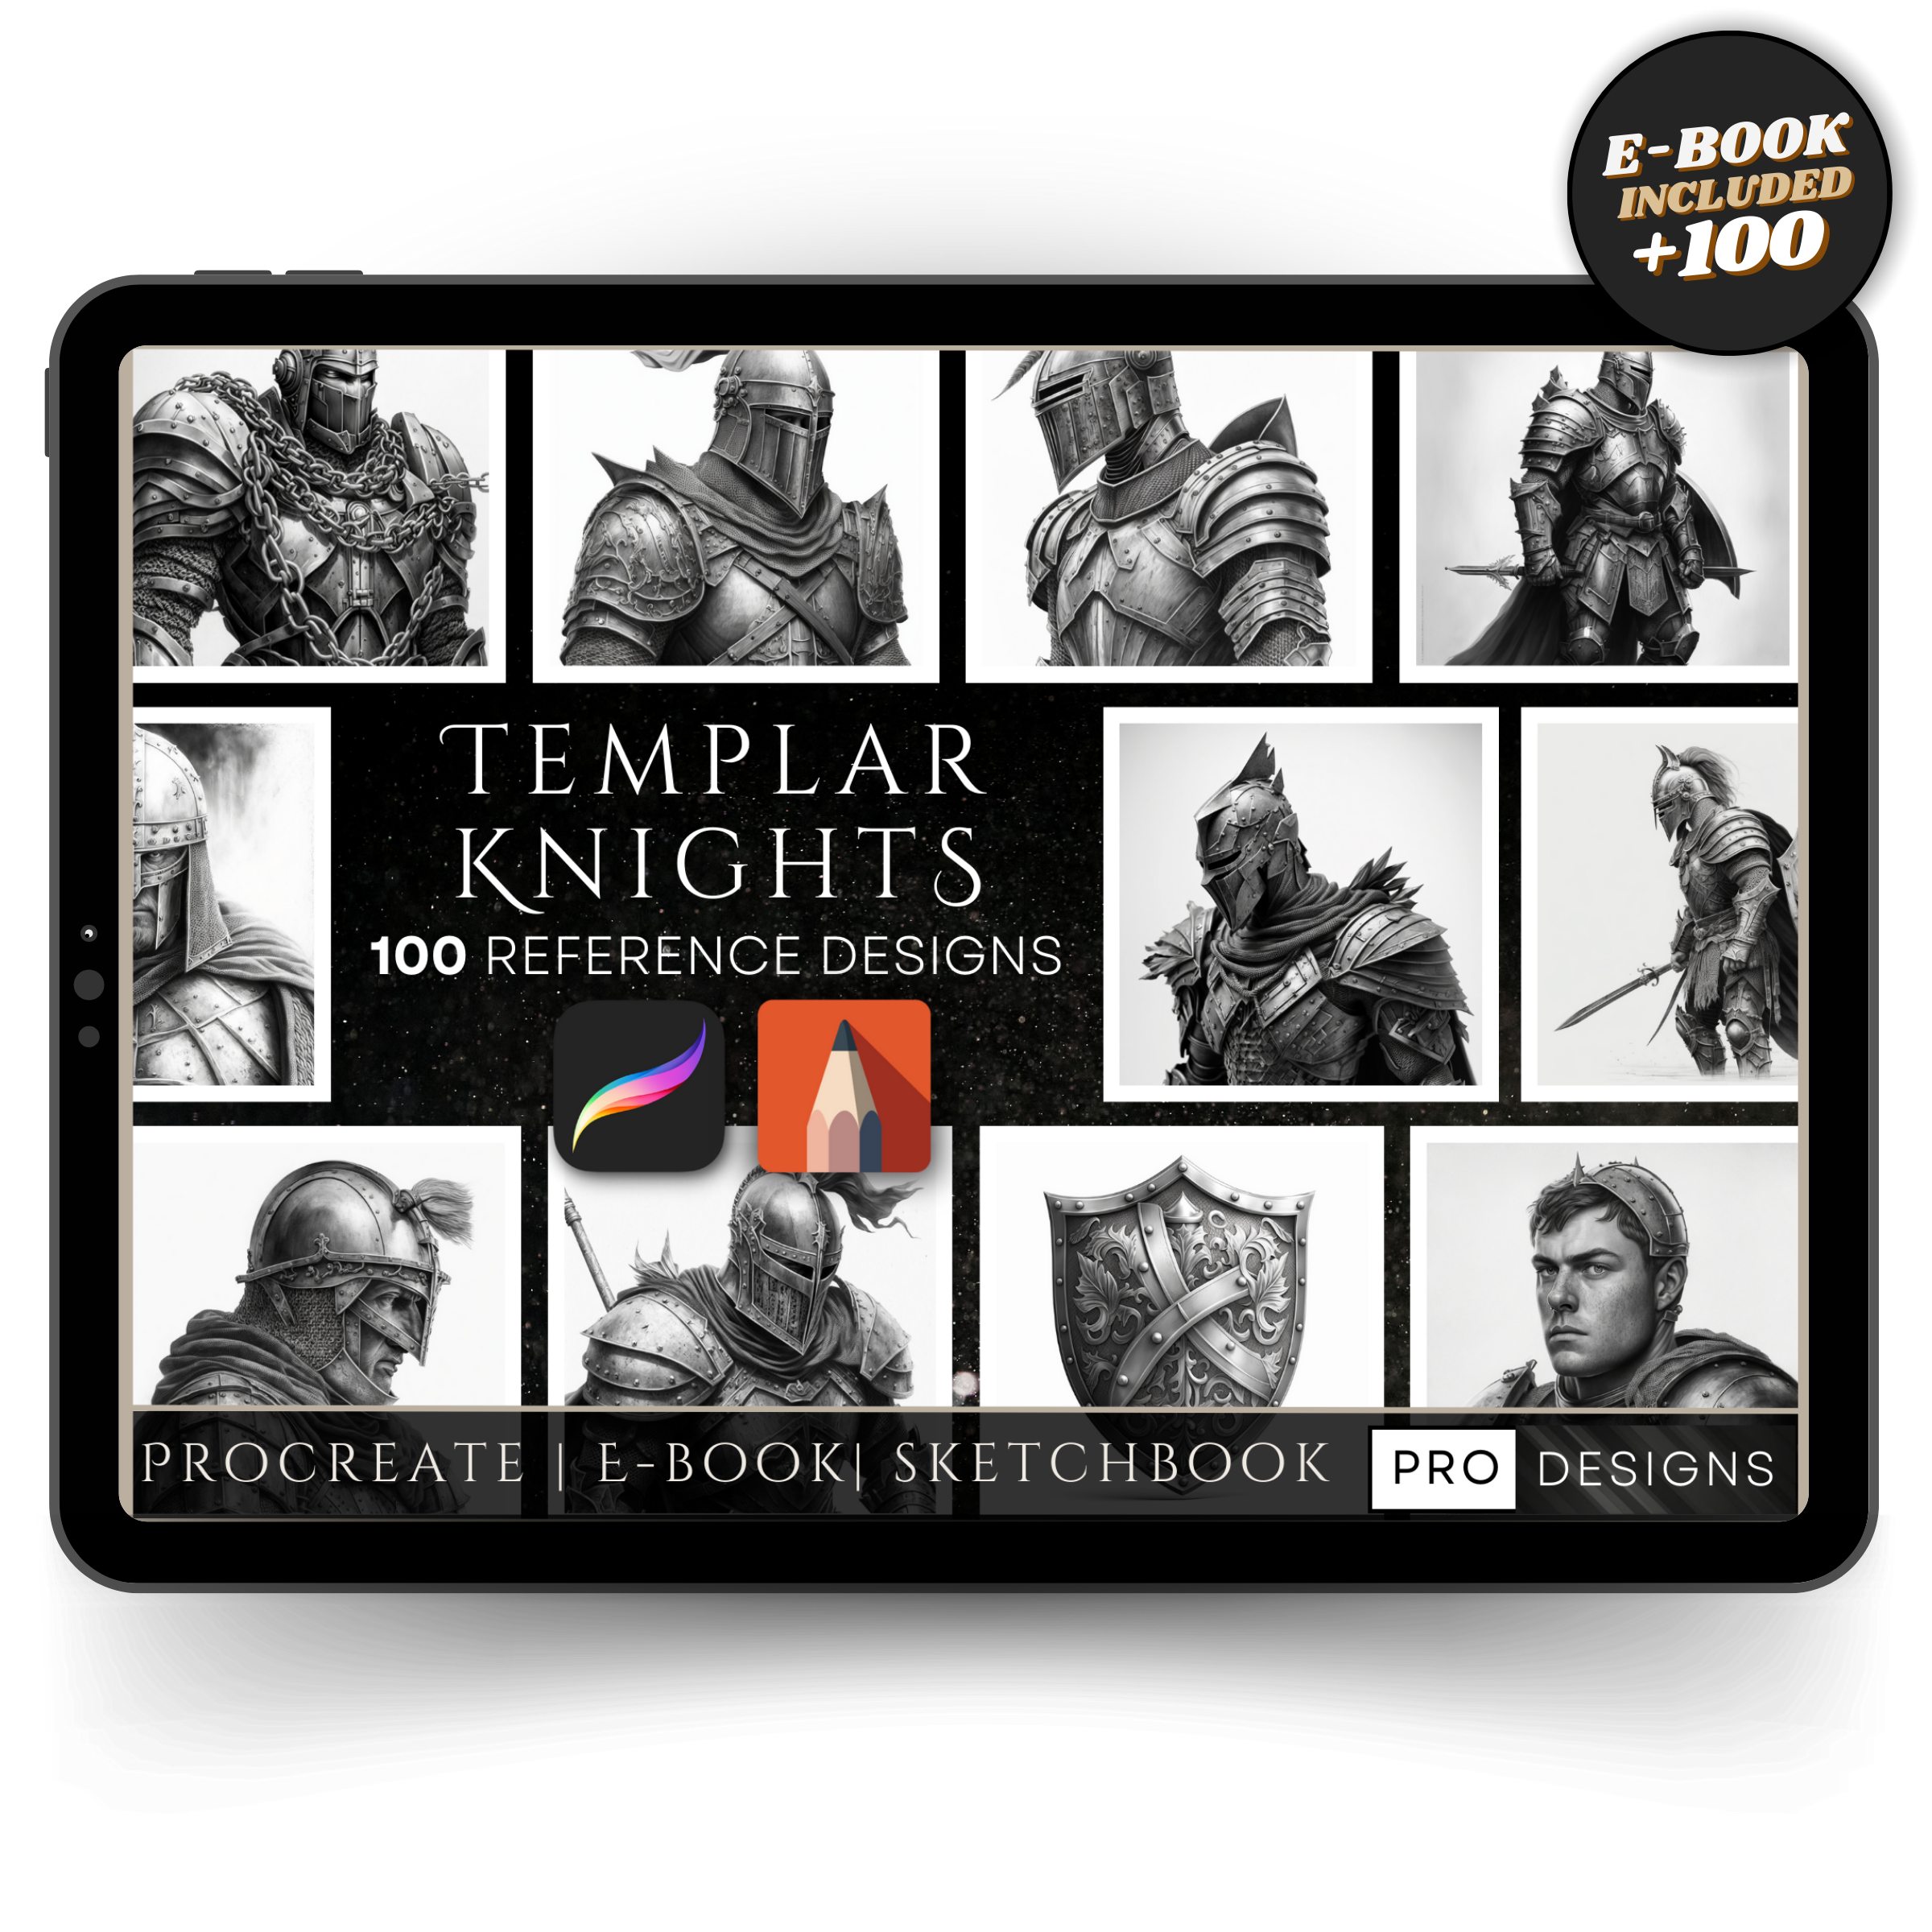 "Crusade of Honor" - The Templar Knights Collection